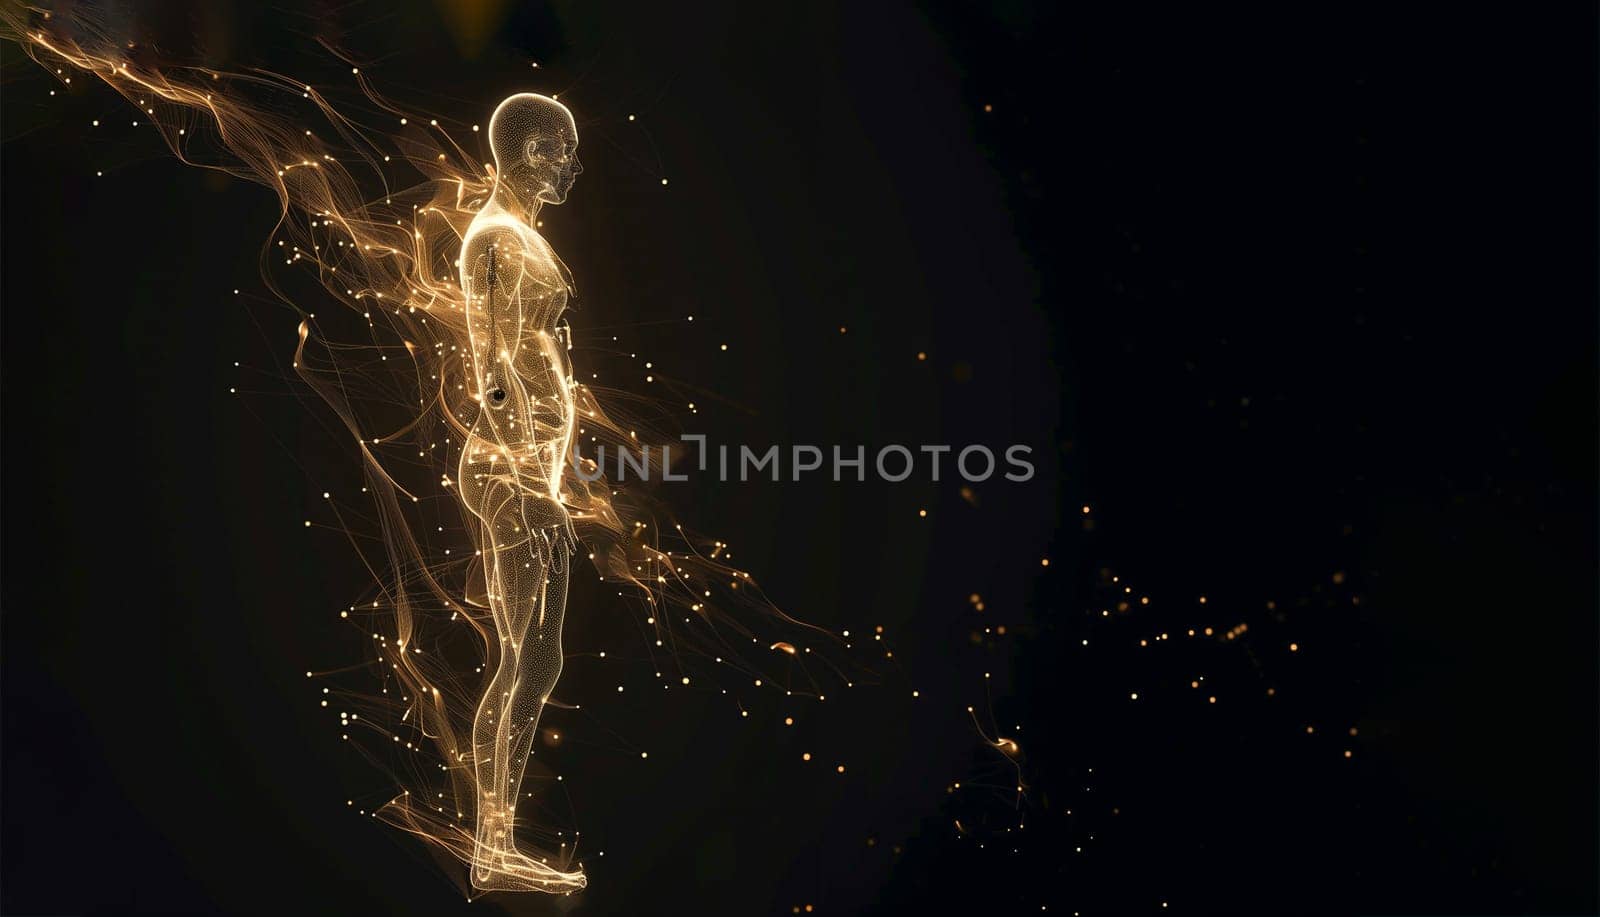 Man Hologram, Gold Glow Wireframe In Shape Of Human. Health, Science And Technology Concept In Dark And Golden Light. Esoteric, Astrology, Meditation, Energy Healing. Ai Generated. Horizontal Plane.